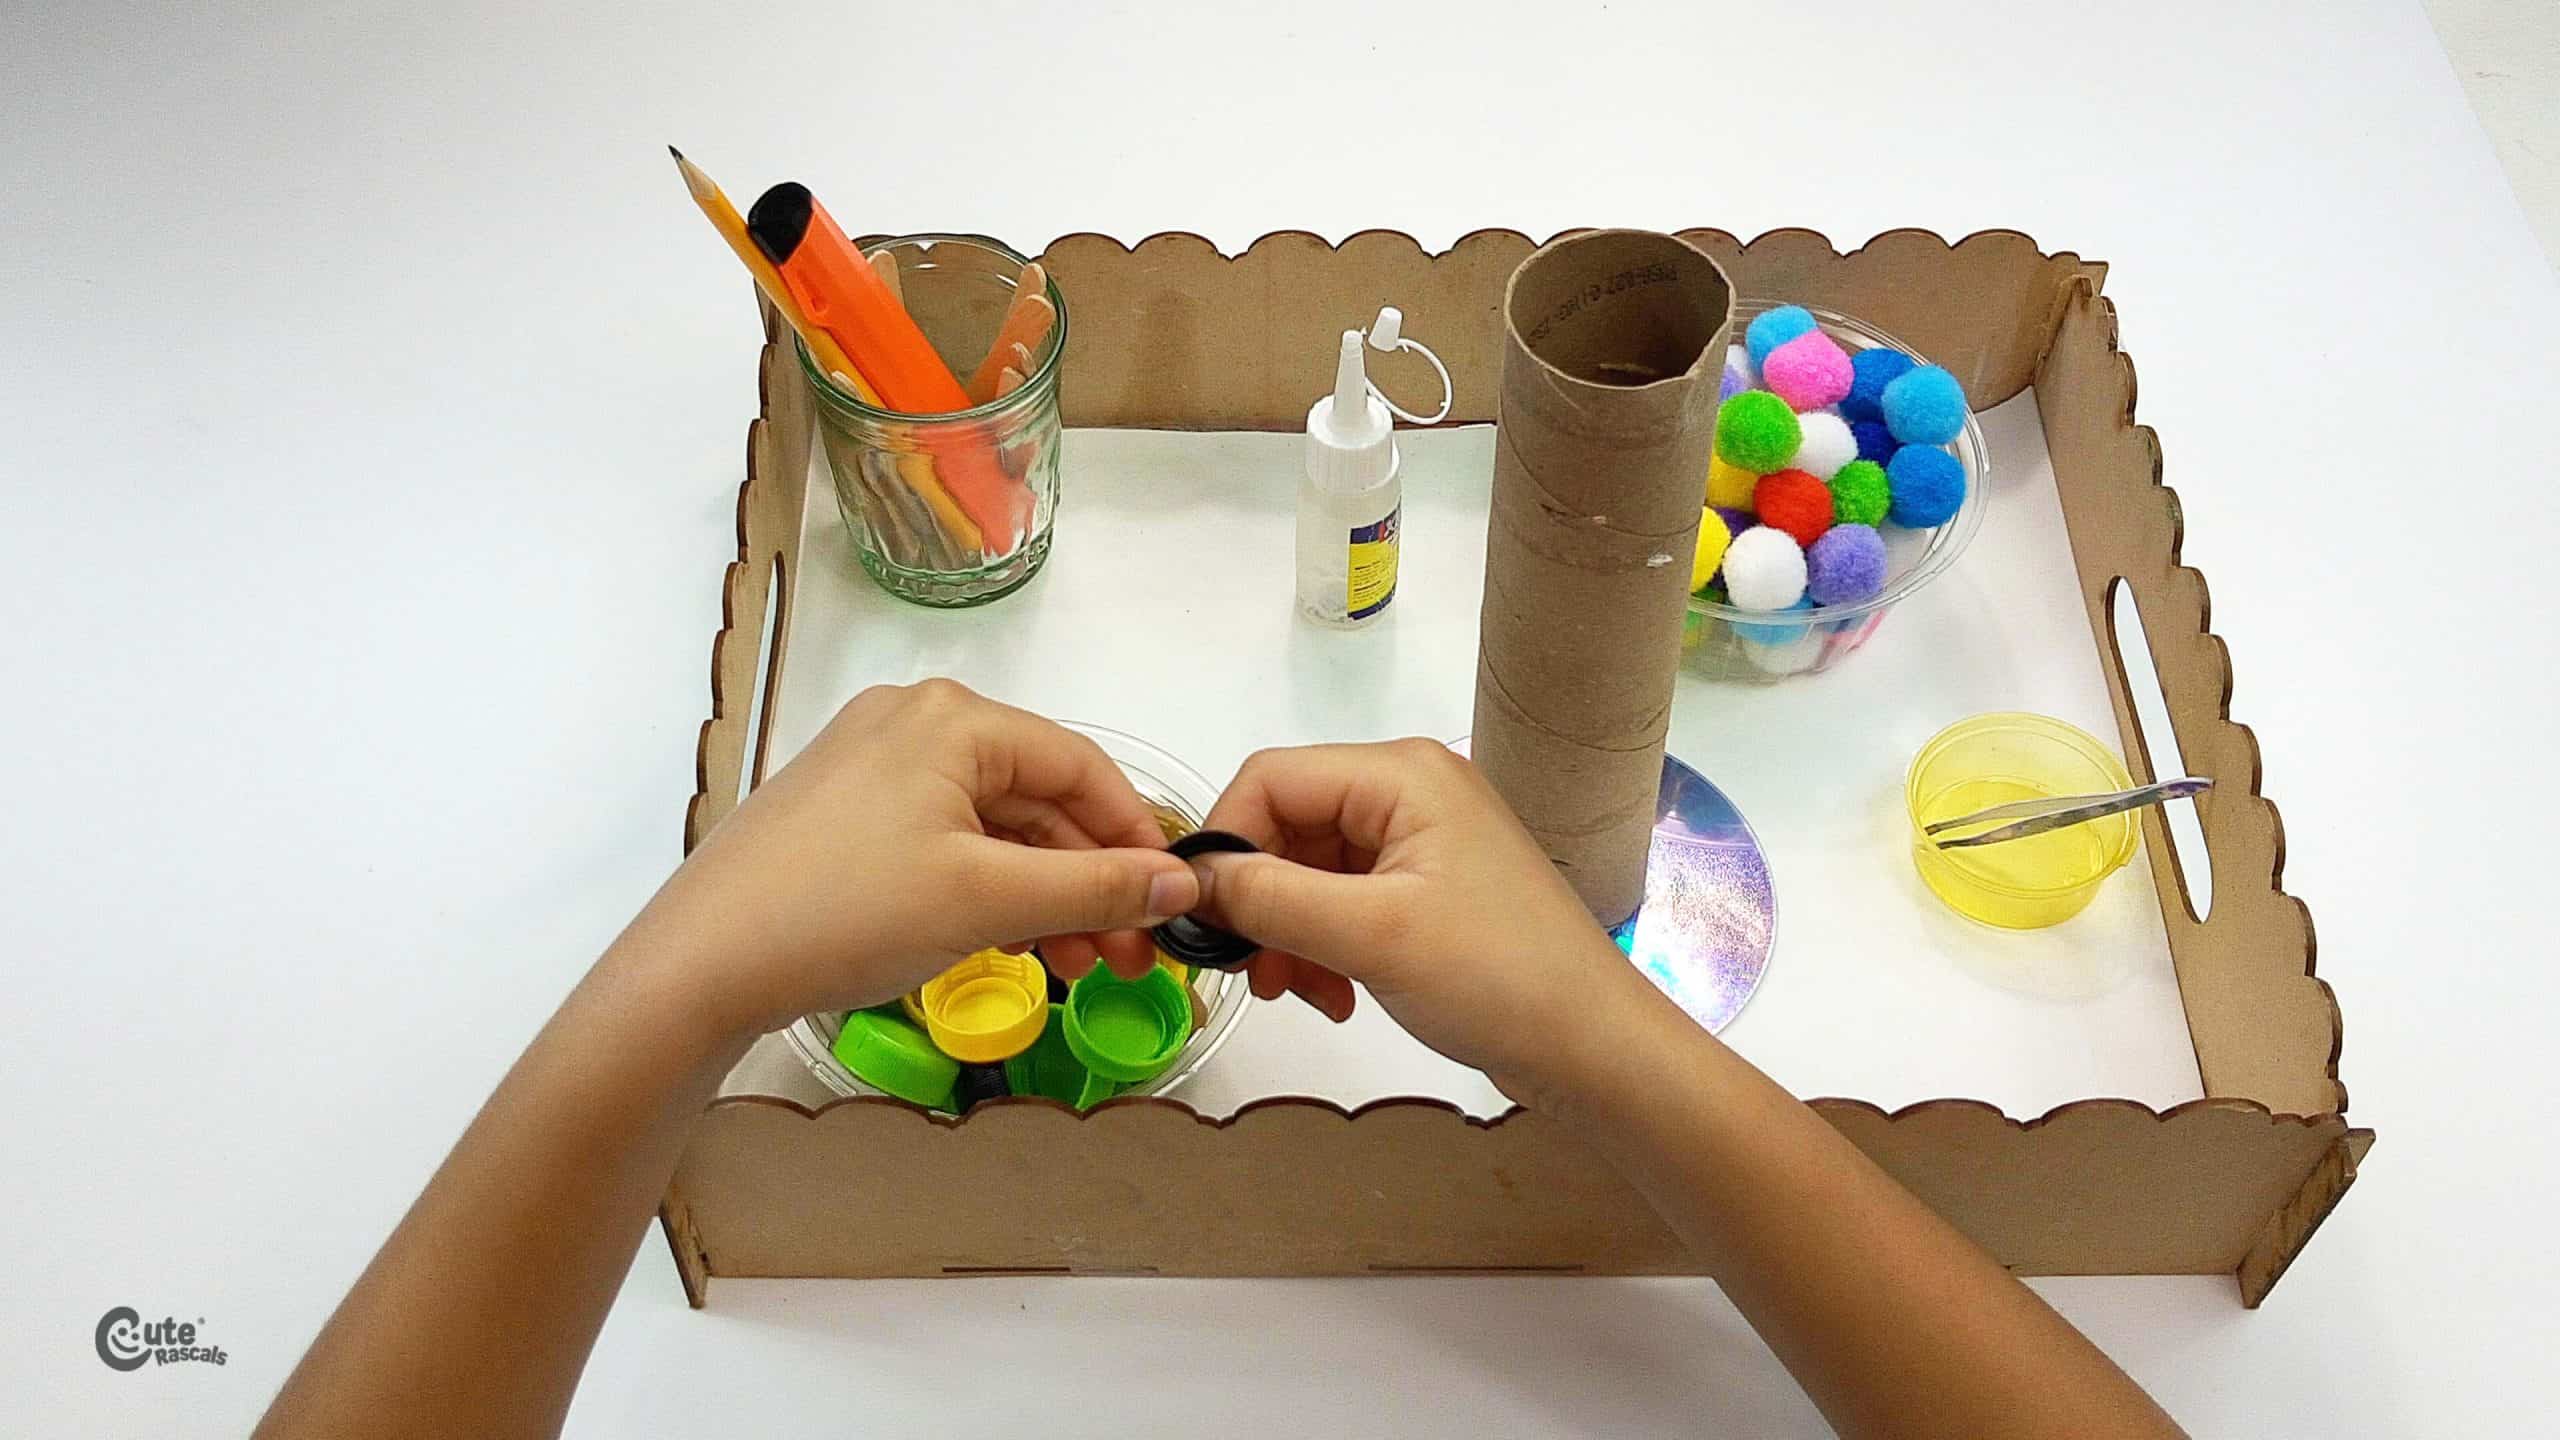 Paste the soda caps on the wooden stick